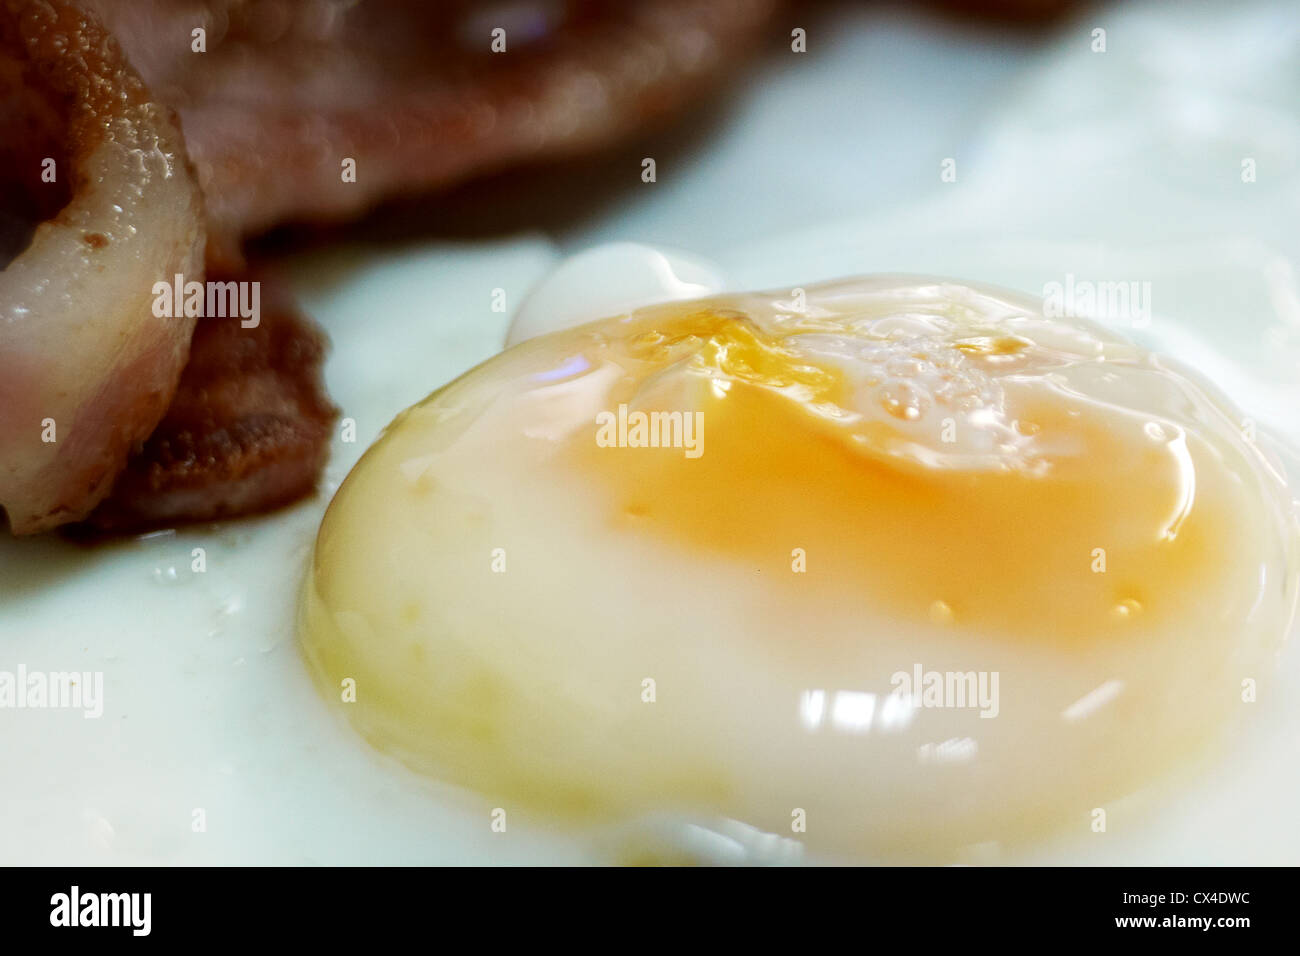 Close up of Egg and Bacon in a cafe Stock Photo